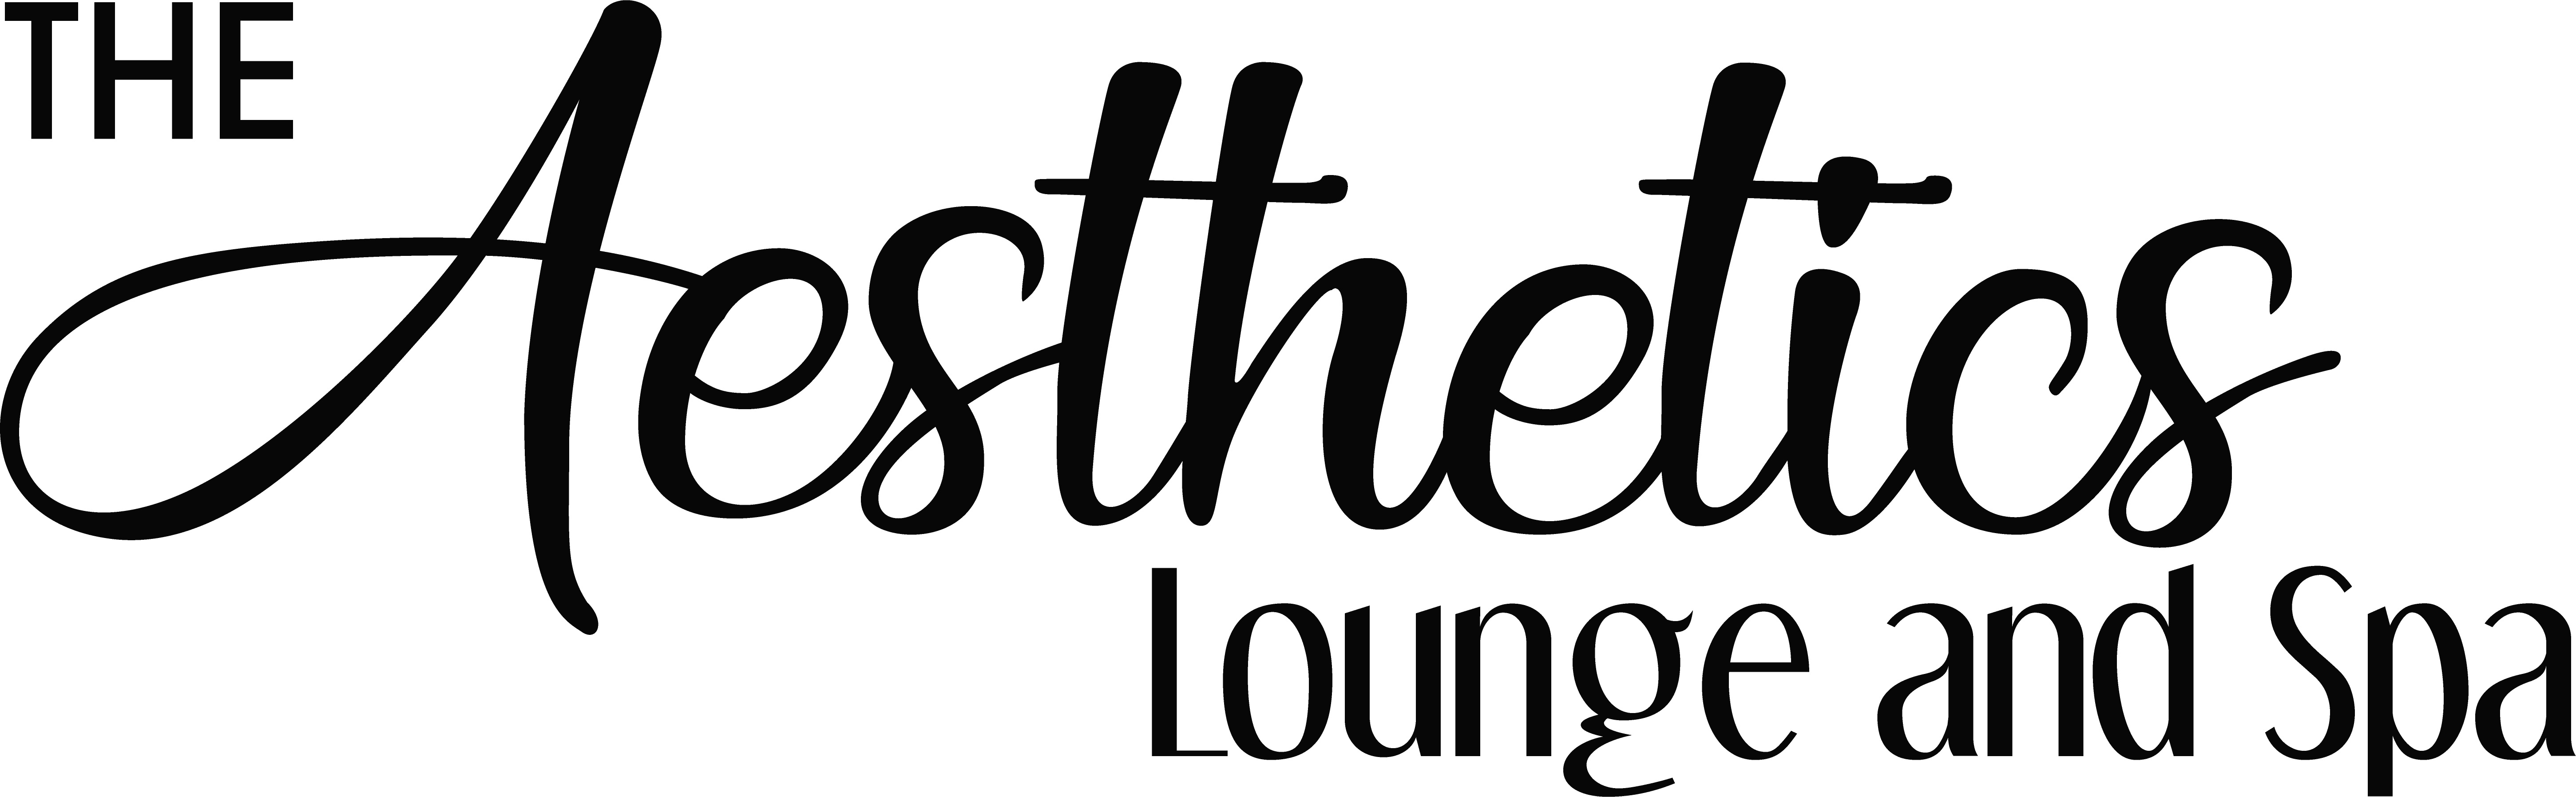 The aesthetic lounge and spa